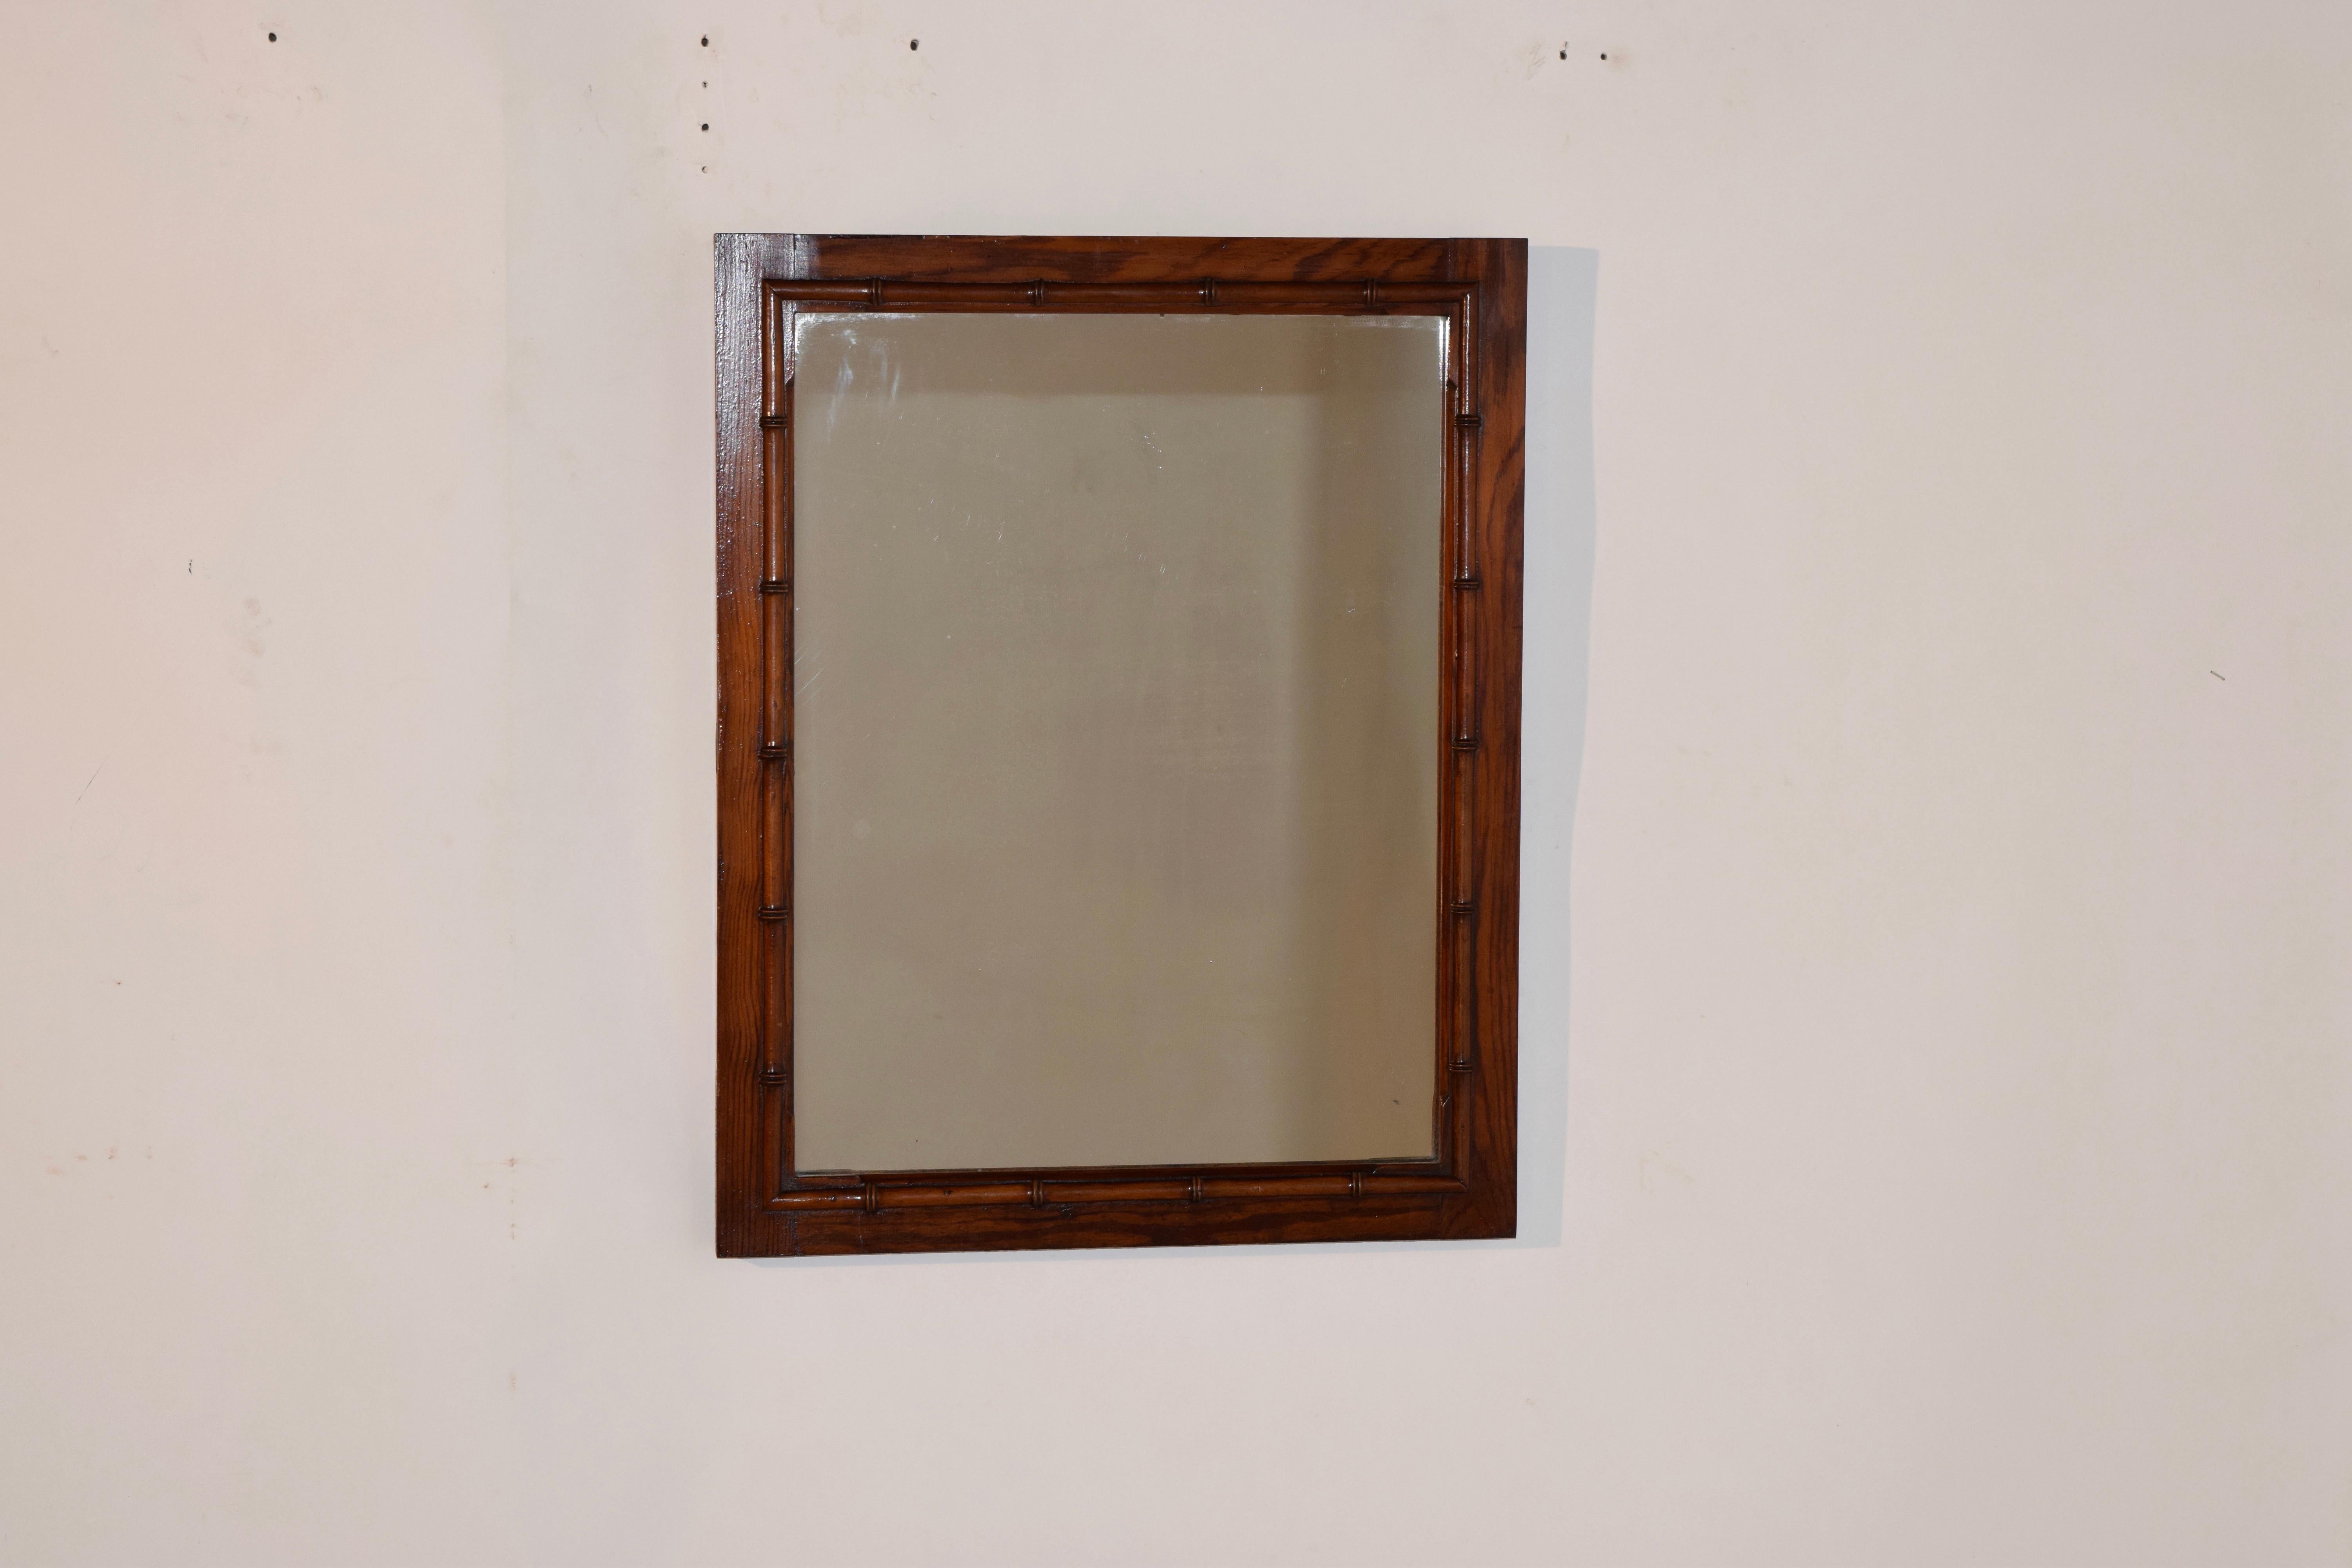 Late 19th century pine and cherry mirror from France with its original mirror. The frame is made from pine and embellished with hand turned faux bamboo molding made from cherry.